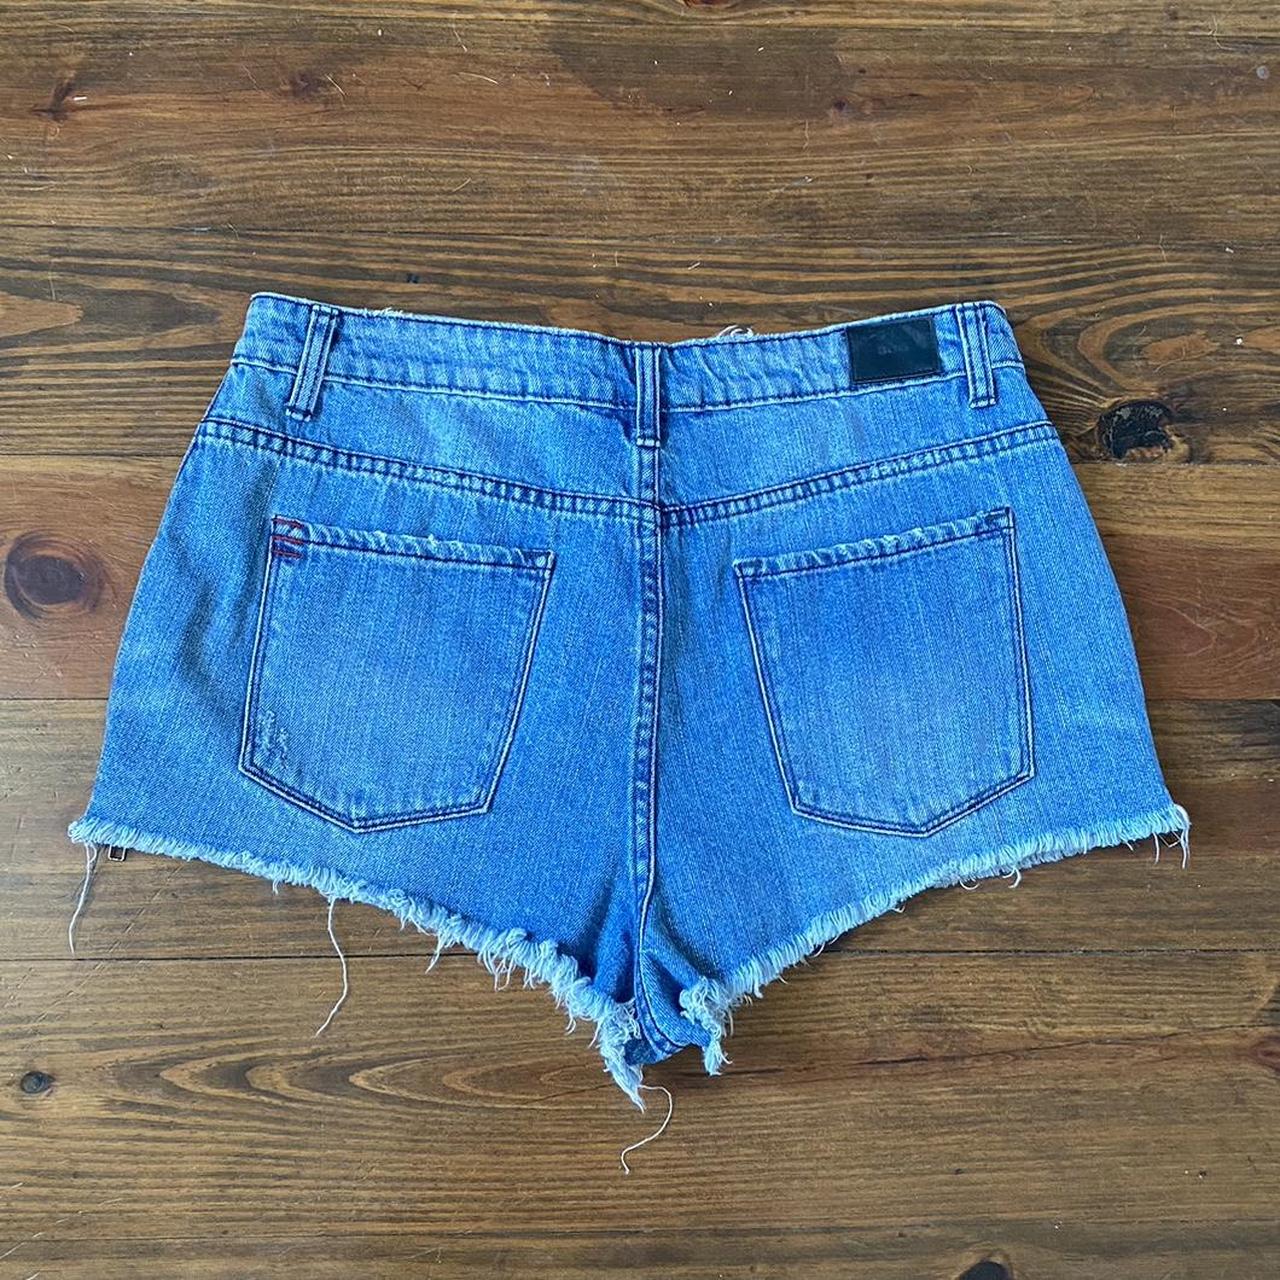 Suns Out Buns Out Low Rise Denim Mini Booty Shorts Cheeky Jean